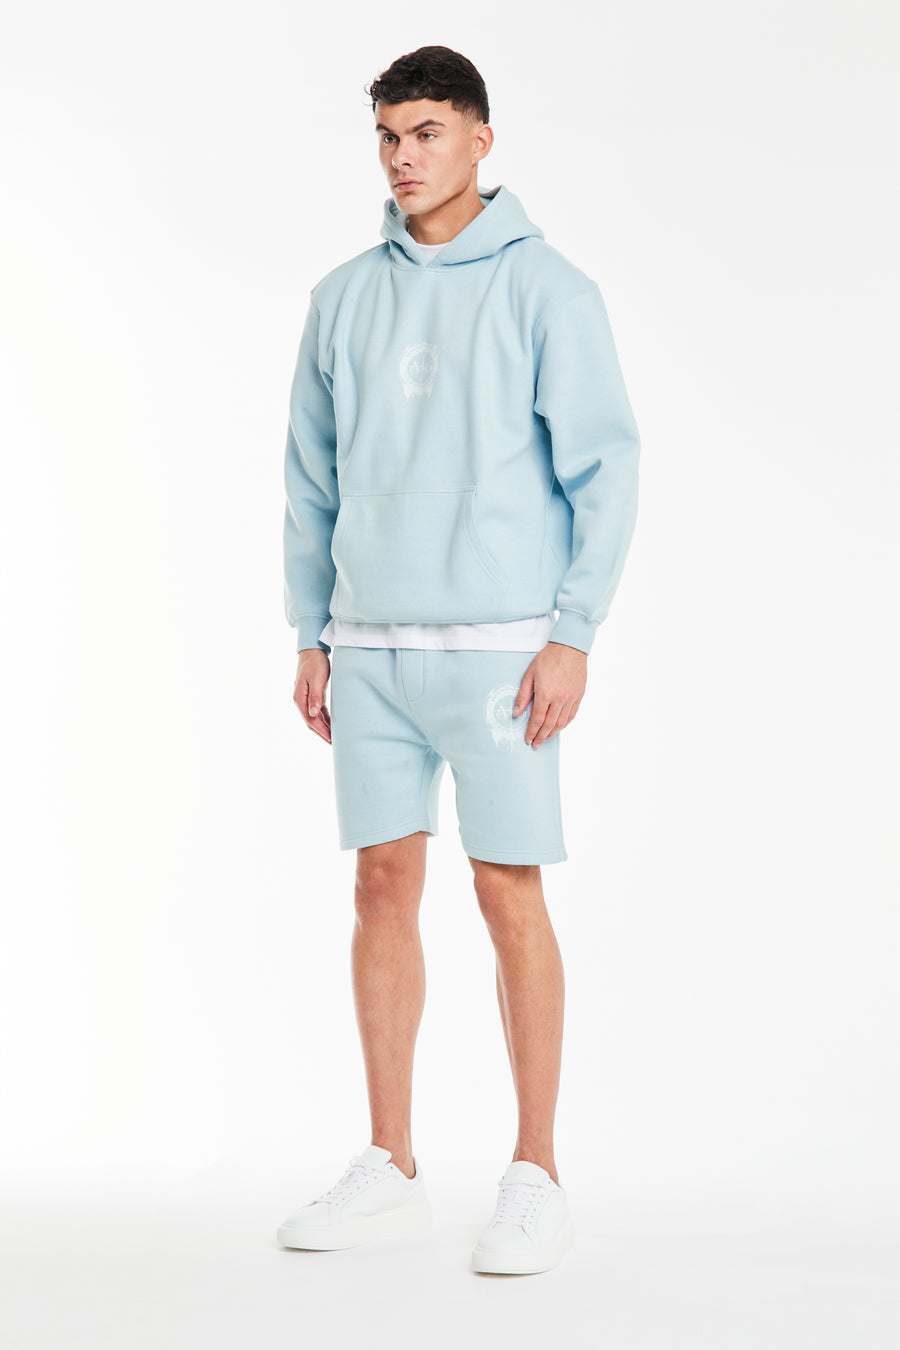 model wearing mens twin short sets in sky blue with logo on chest